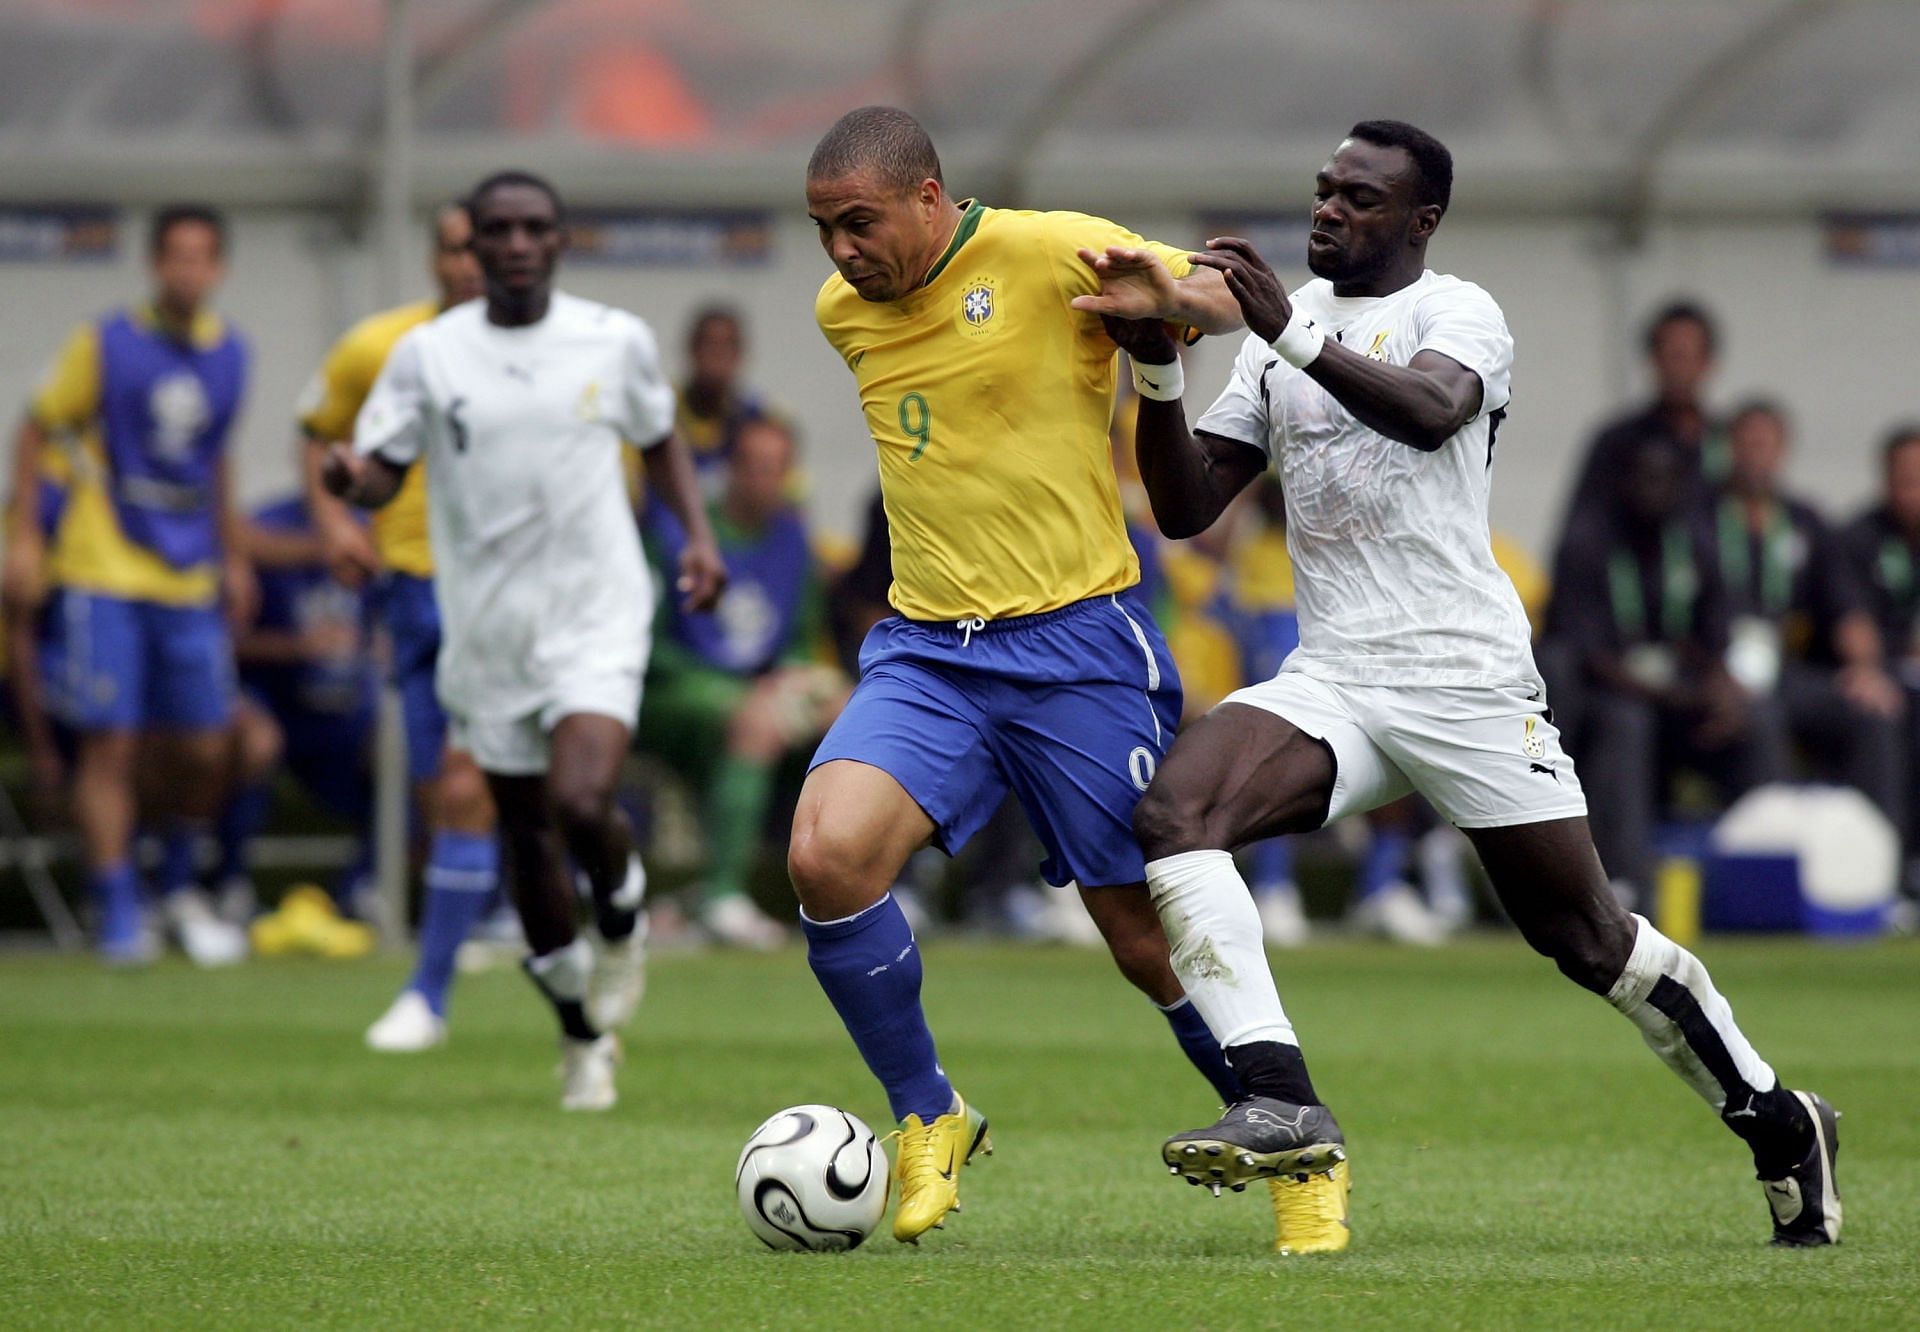 Brazil&#039;s Ronaldo Nazario (#9) inspired an entire generation of players.